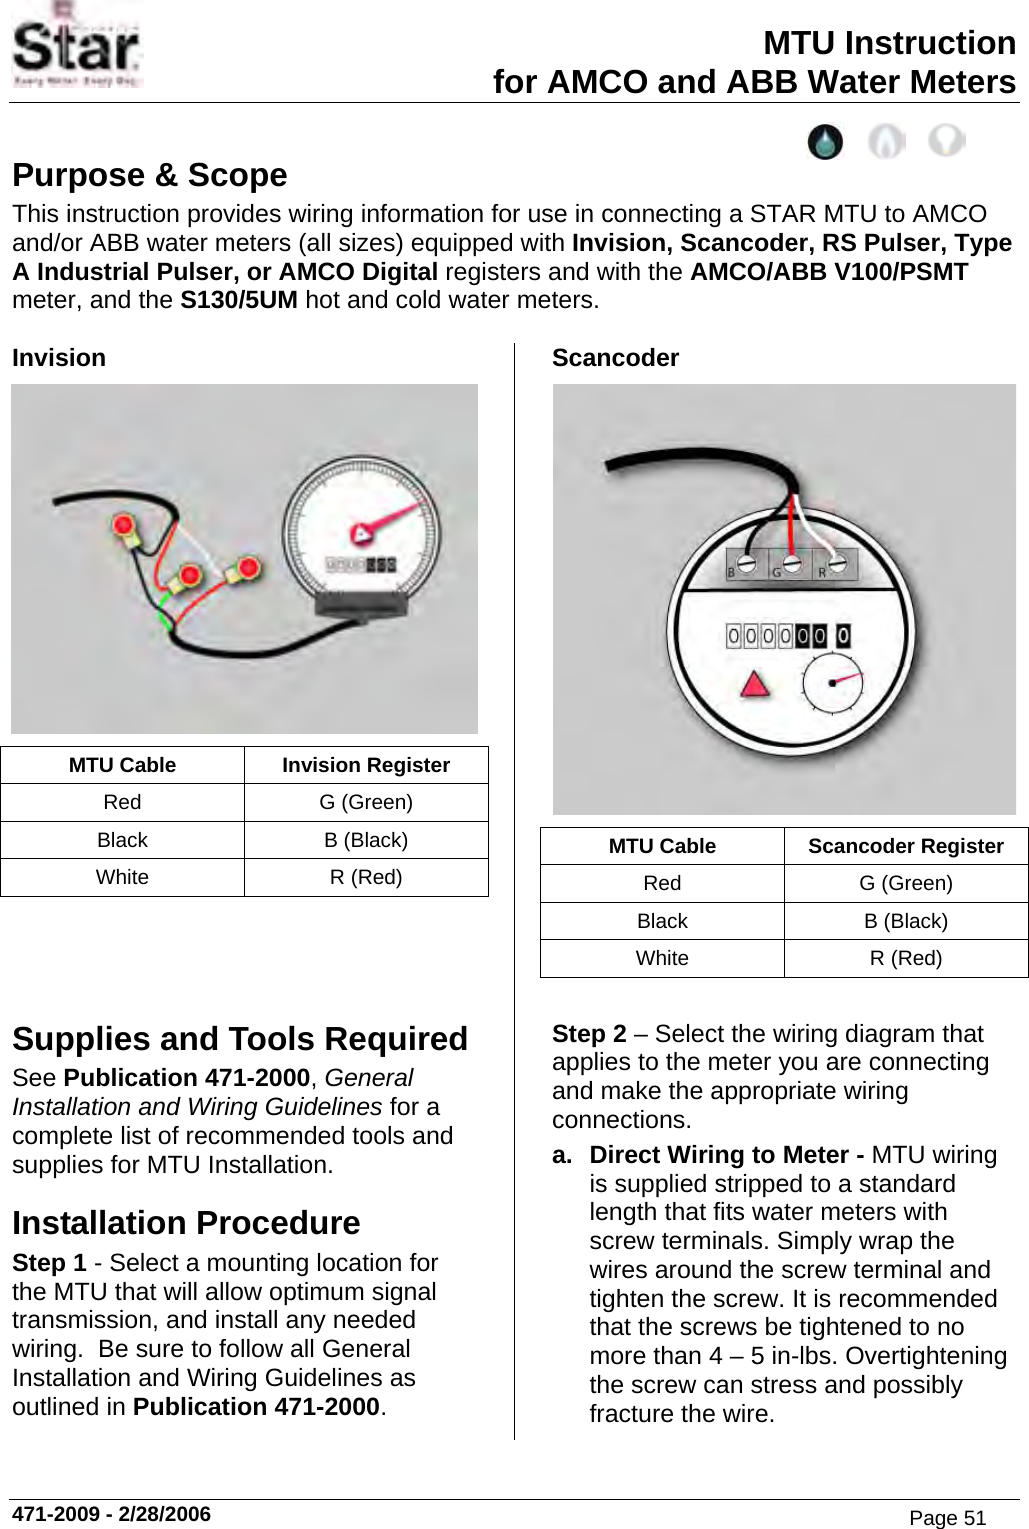 MTU Instruction for AMCO and ABB Water Meters Purpose &amp; Scope This instruction provides wiring information for use in connecting a STAR MTU to AMCO and/or ABB water meters (all sizes) equipped with Invision, Scancoder, RS Pulser, Type A Industrial Pulser, or AMCO Digital registers and with the AMCO/ABB V100/PSMT meter, and the S130/5UM hot and cold water meters.  Invision  MTU Cable  Invision Register Red G (Green) Black B (Black) White R (Red) Scancoder  MTU Cable  Scancoder Register Red G (Green) Black B (Black) White R (Red)  Supplies and Tools Required See Publication 471-2000, General Installation and Wiring Guidelines for a complete list of recommended tools and supplies for MTU Installation. Installation Procedure Step 1 - Select a mounting location for the MTU that will allow optimum signal transmission, and install any needed wiring.  Be sure to follow all General Installation and Wiring Guidelines as outlined in Publication 471-2000. Step 2 – Select the wiring diagram that applies to the meter you are connecting and make the appropriate wiring connections. a.  Direct Wiring to Meter - MTU wiring is supplied stripped to a standard length that fits water meters with screw terminals. Simply wrap the wires around the screw terminal and tighten the screw. It is recommended that the screws be tightened to no more than 4 – 5 in-lbs. Overtightening the screw can stress and possibly fracture the wire. 471-2009 - 2/28/2006 Page 51